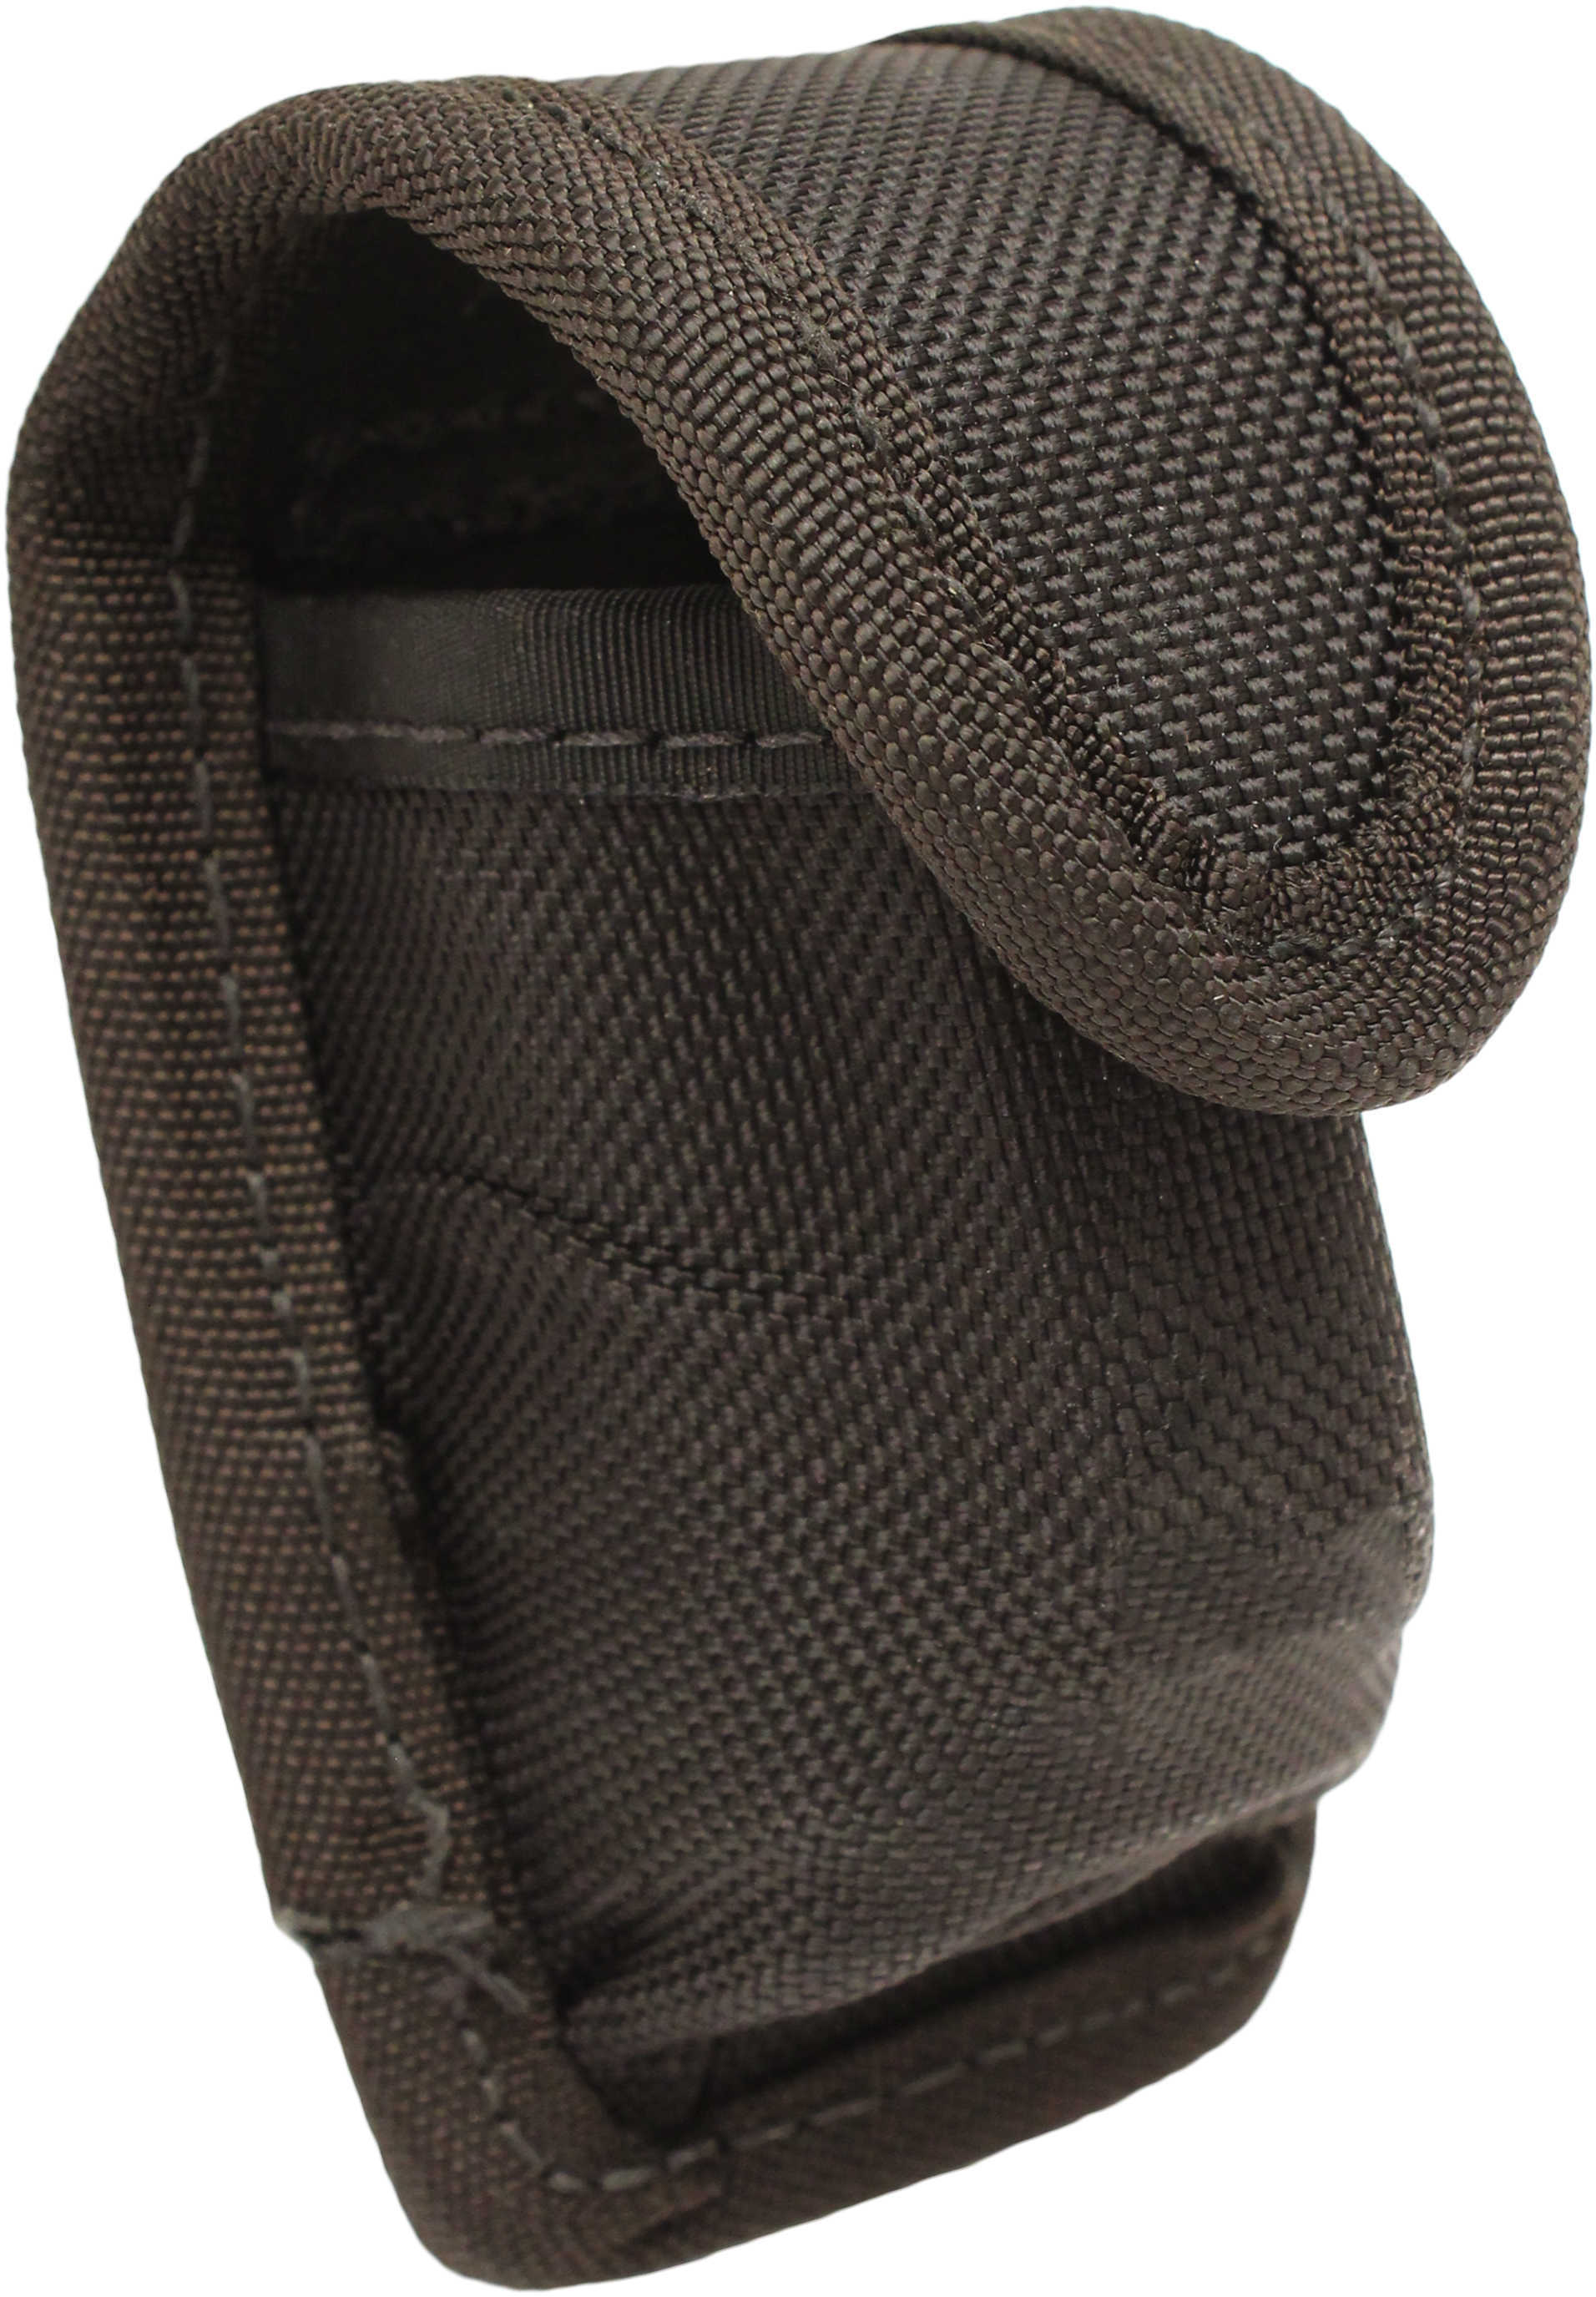 Streamlight Tactical Lights Parts & Acc. M-6 Holster Md: 69202